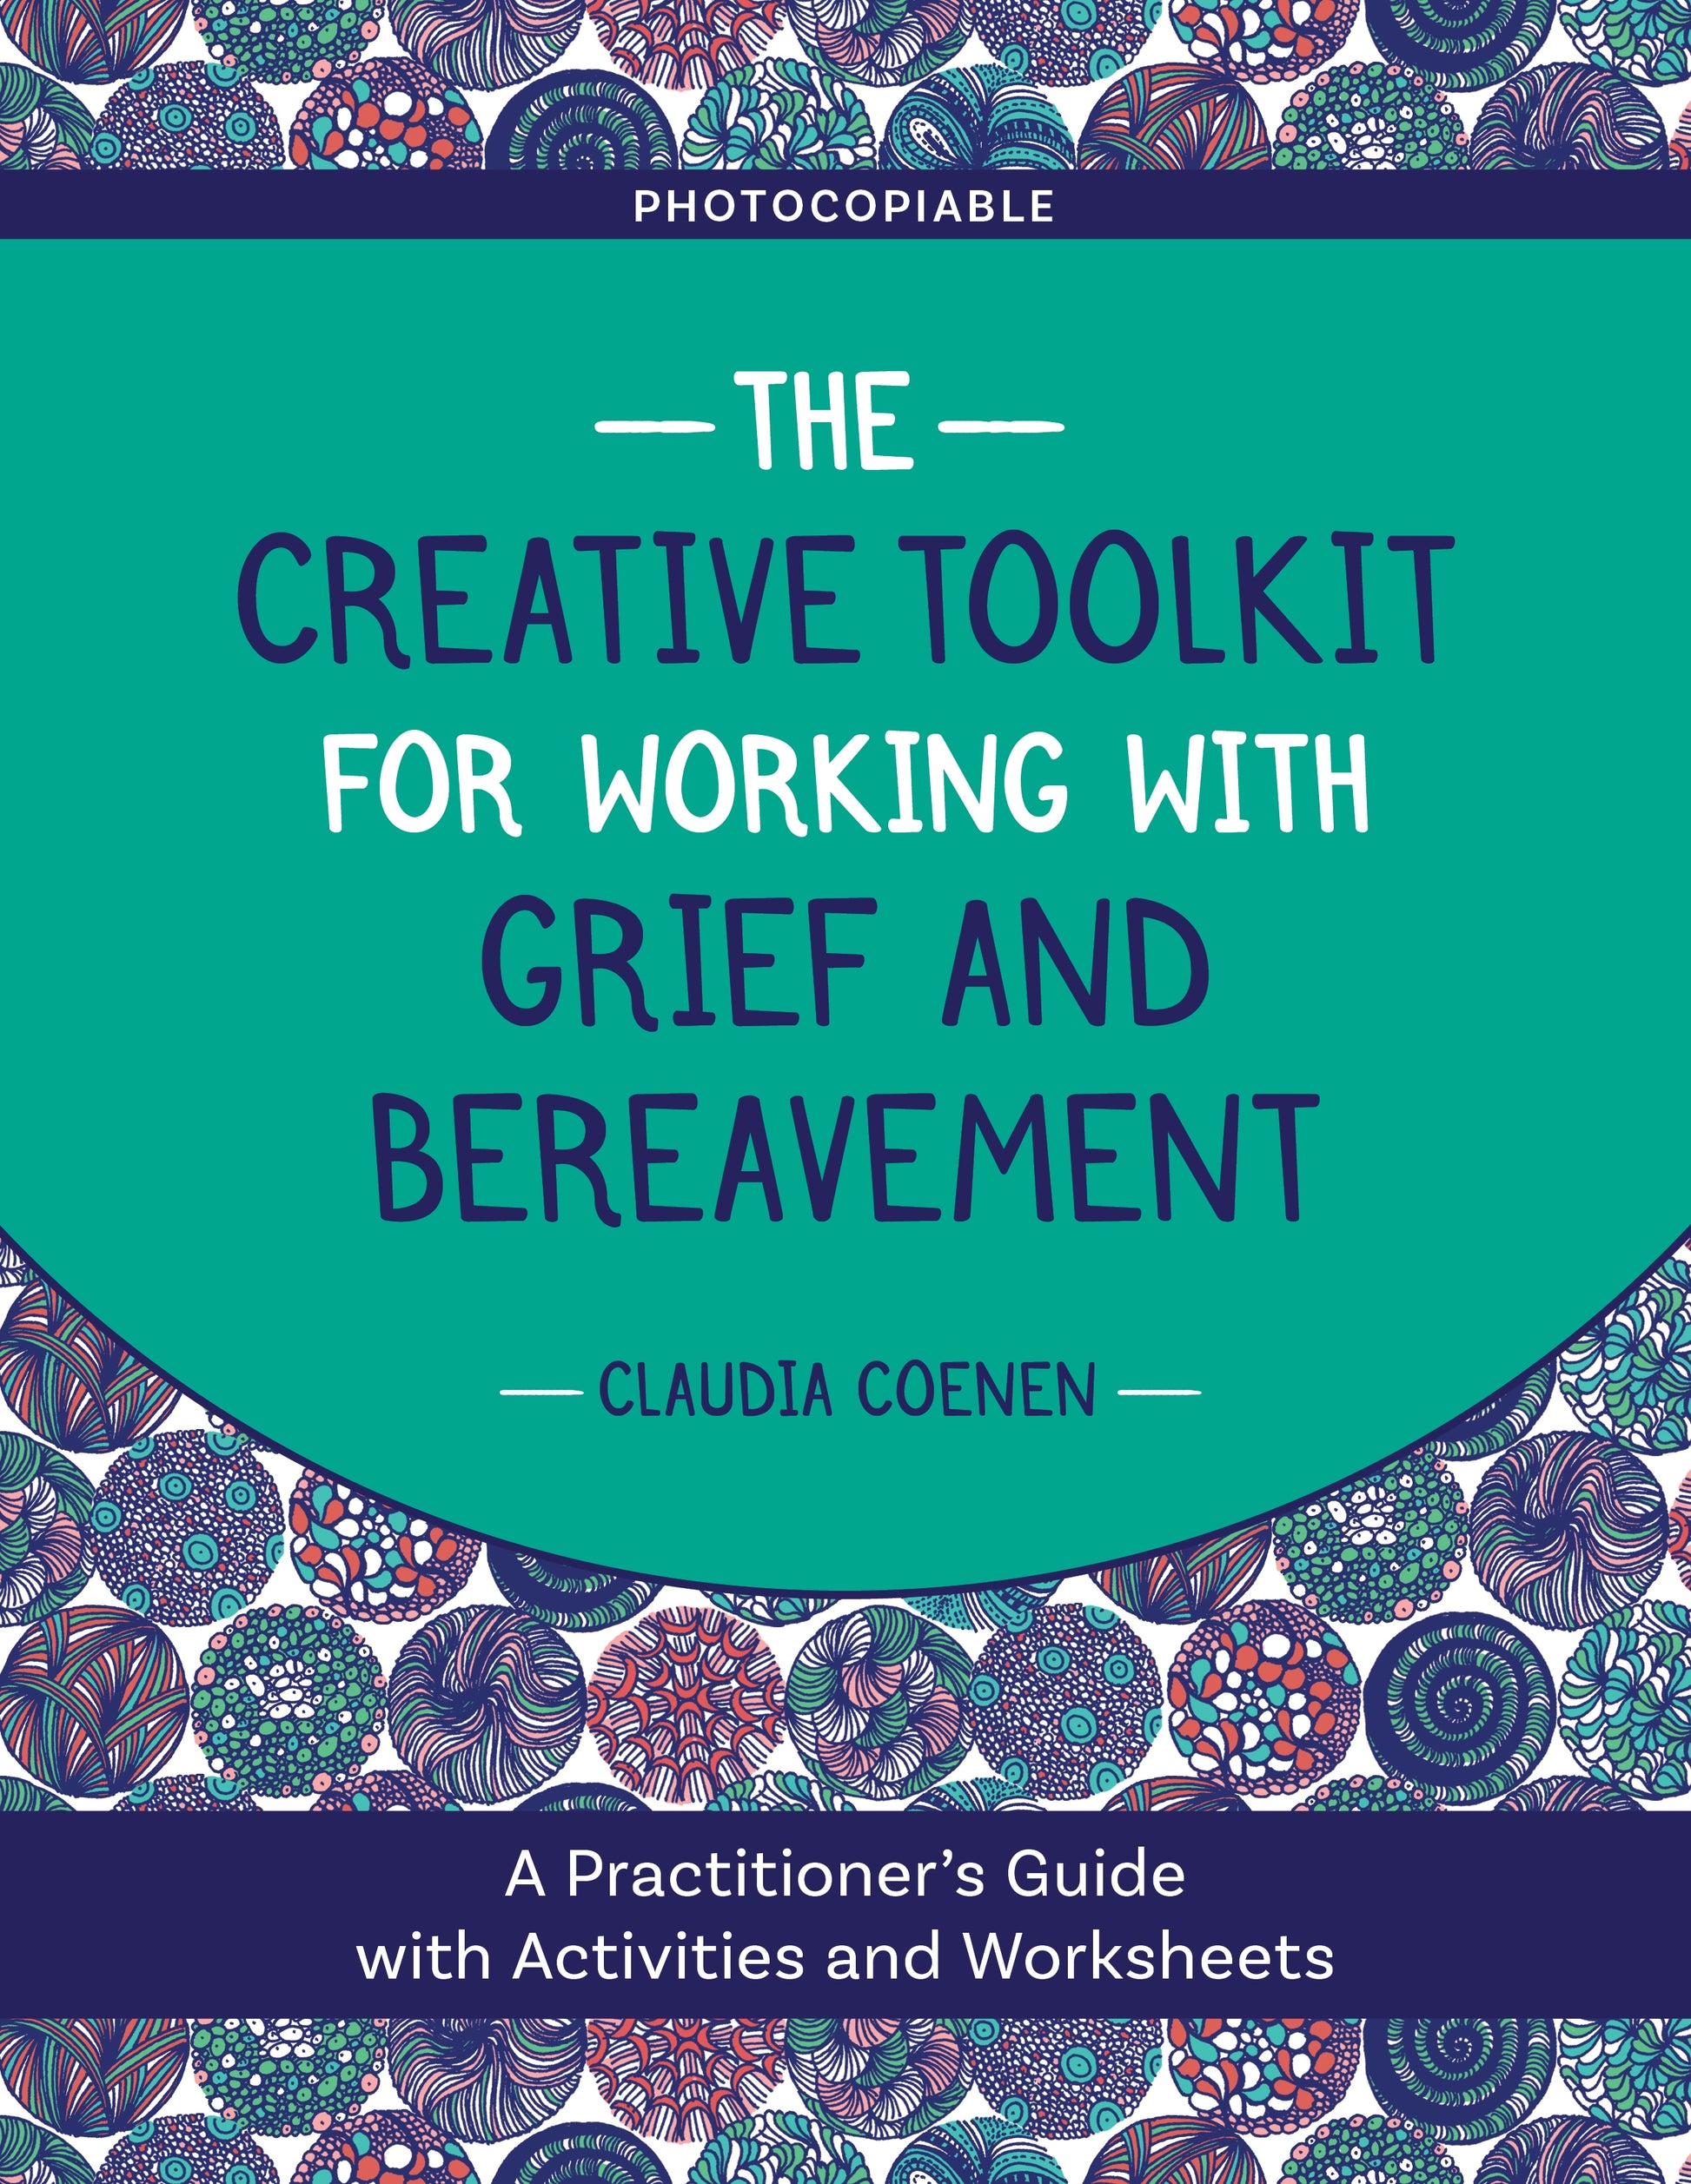 The Creative Toolkit for Working with Grief and Bereavement by Masha Pimas, Claudia Coenen